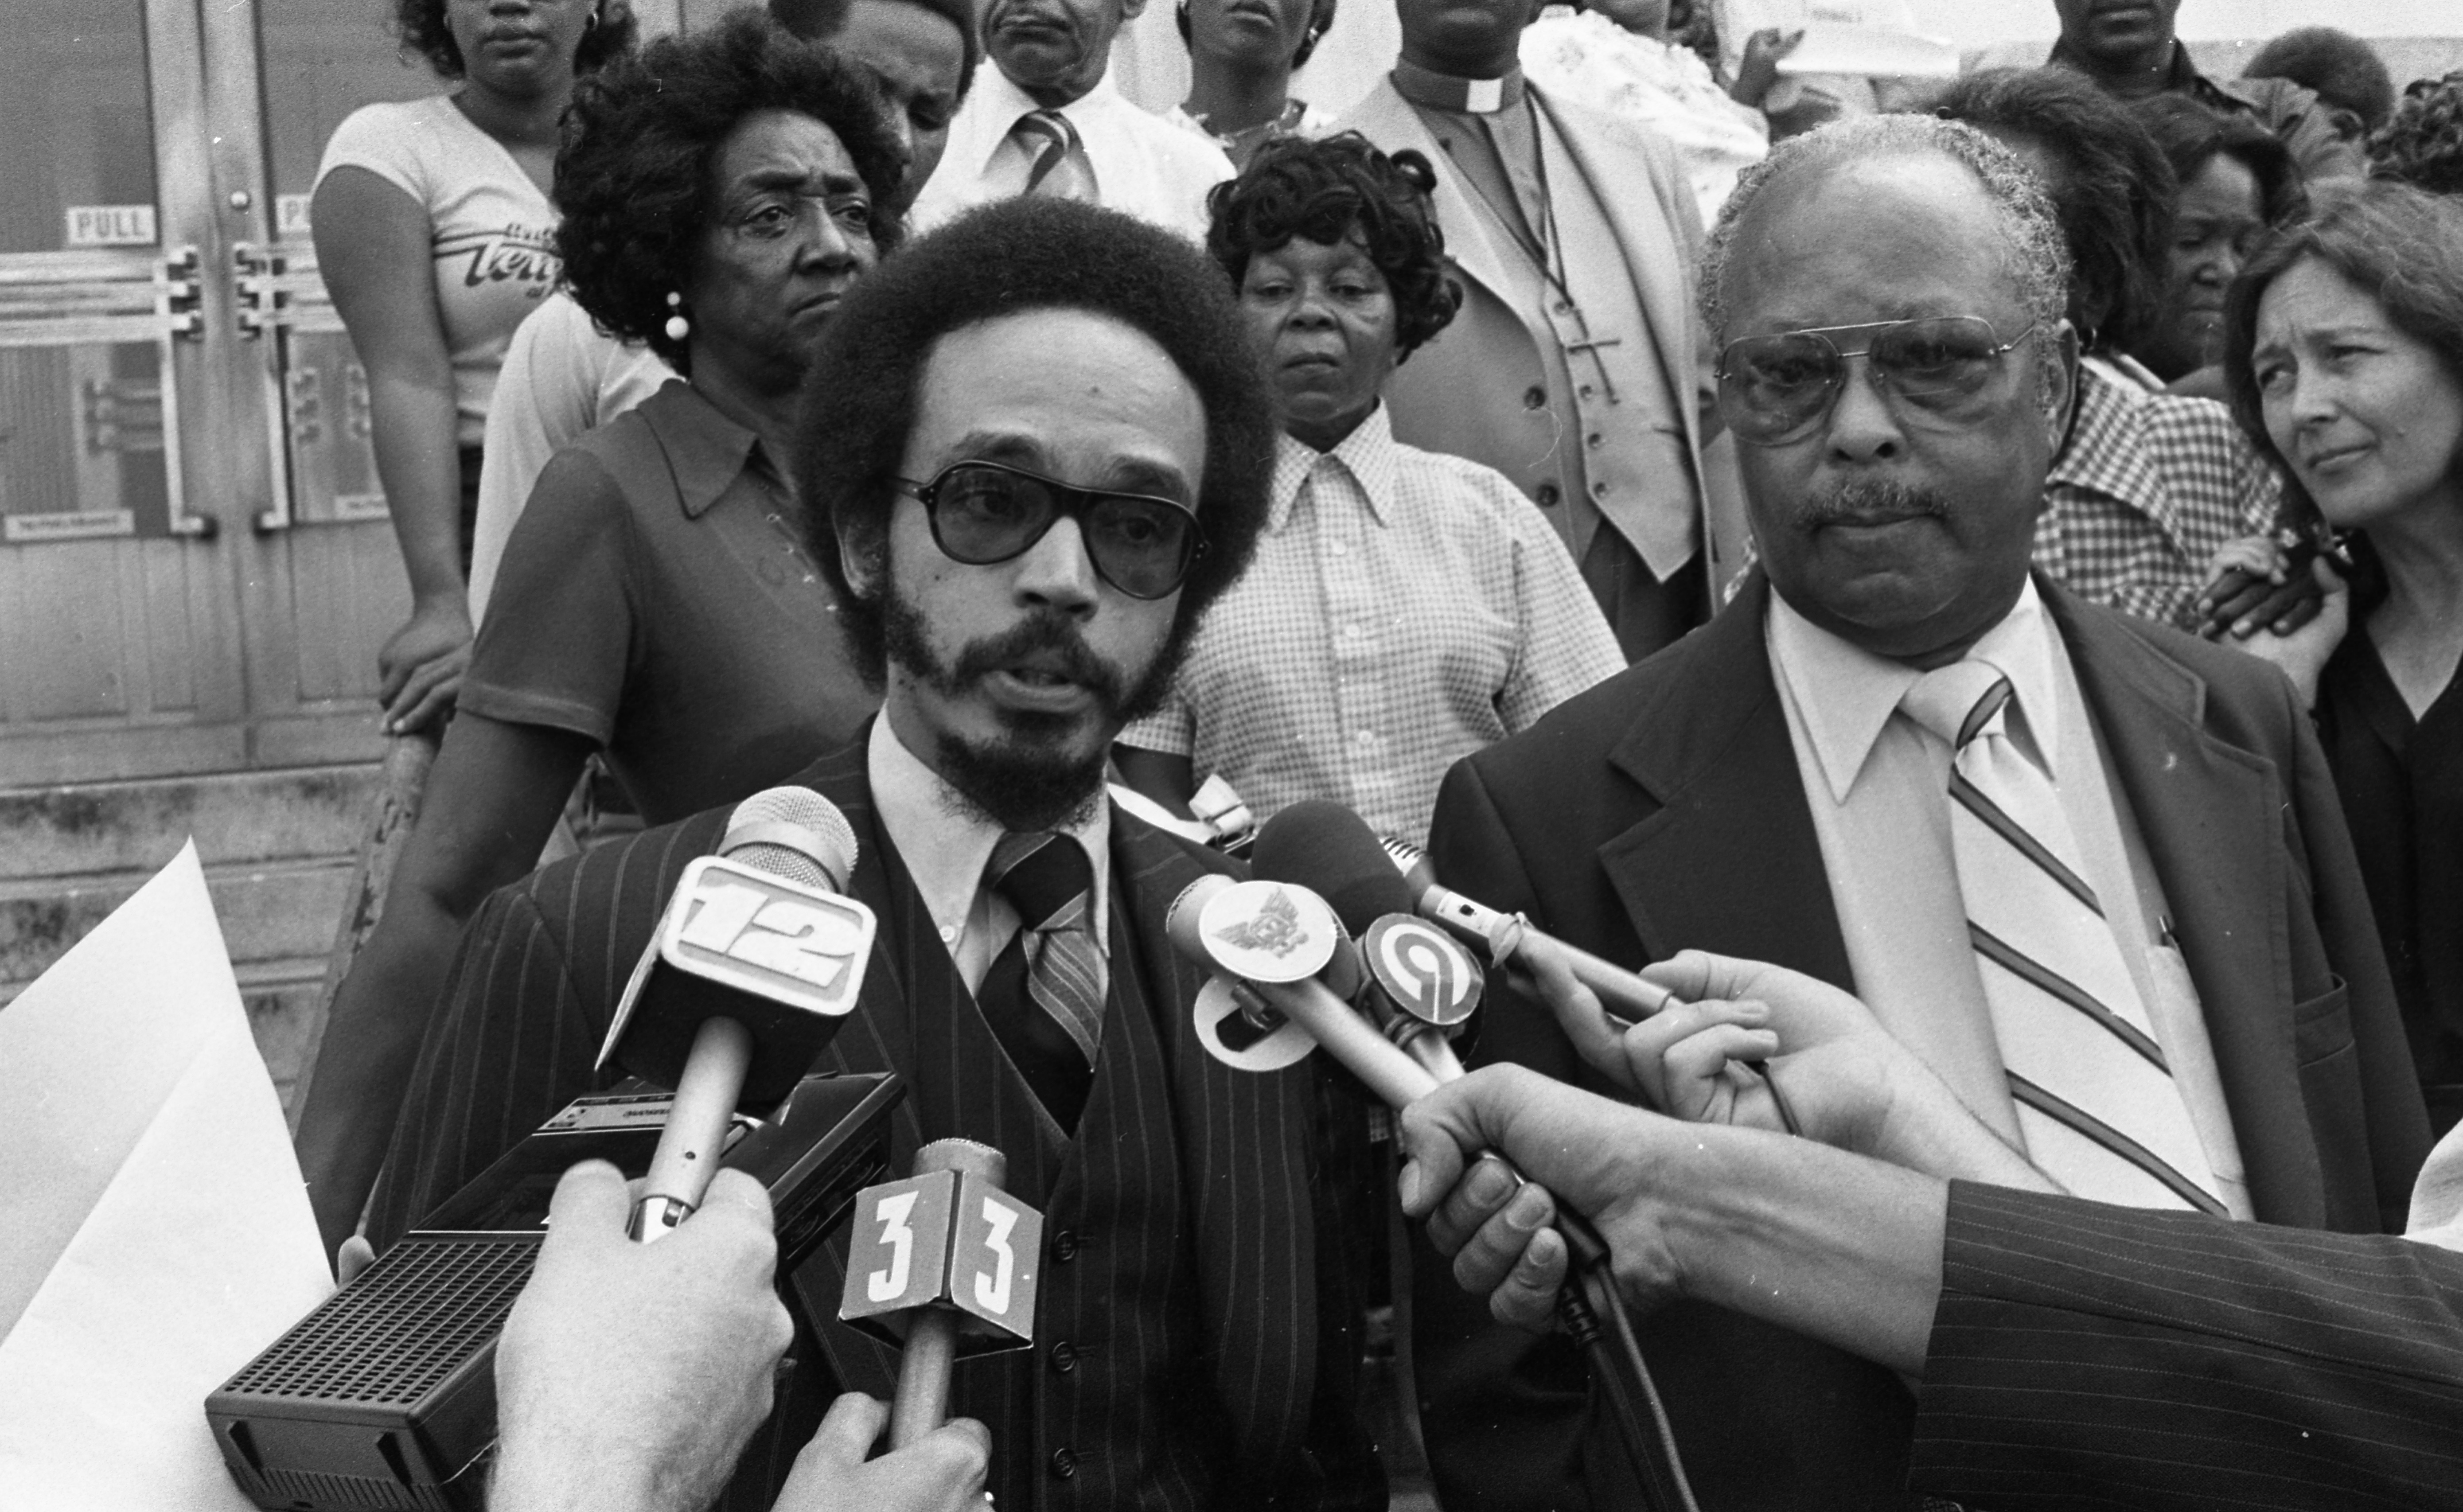 A film still from How to Sue the Klan that shows a black-and-white photo of a young Black man speaking at a press conference with several reporters microphones pointed towards him. Directly next to the man is another Black man with a serious expression, and behind them are a predominantly Black audience all with blank and serious facial expressions.